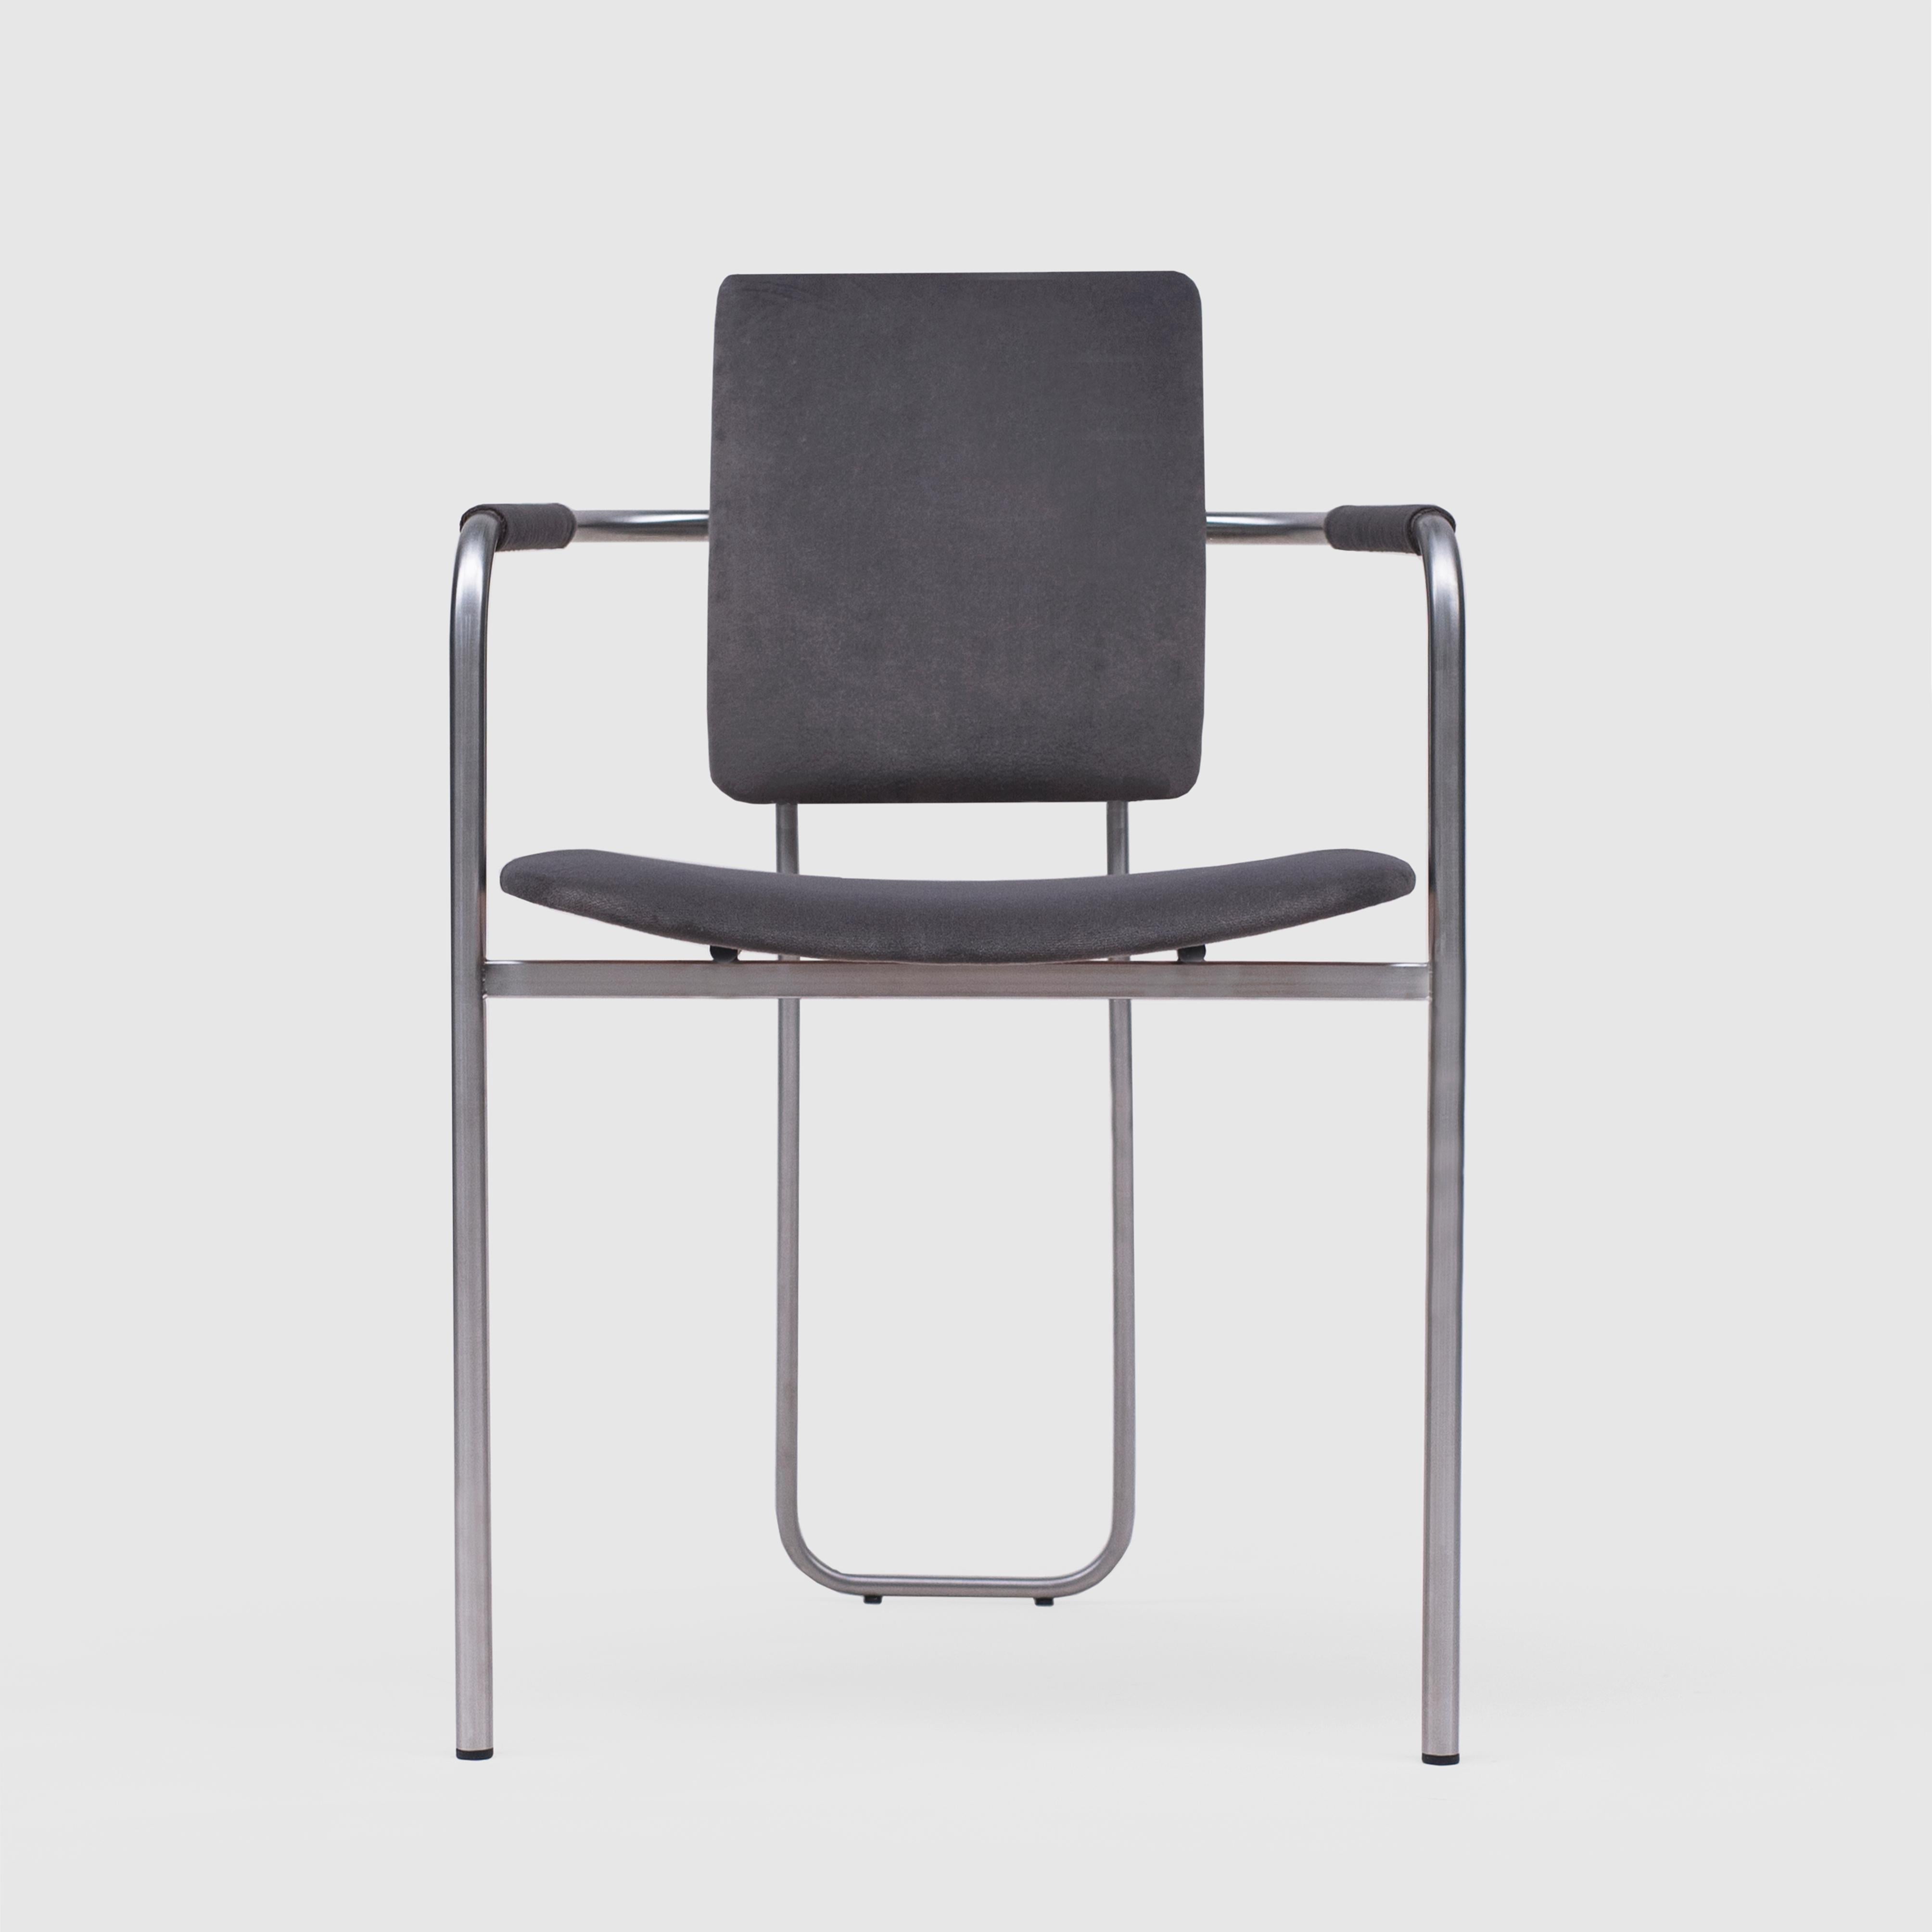 Chair designed by Peter Ghyczy in 2018.
Manufactured by Ghyczy (Netherlands)

Avant-garde in its look and function, this lightweight design features a flexible backrest, which adjusts to the movement of the person using it.

Material and